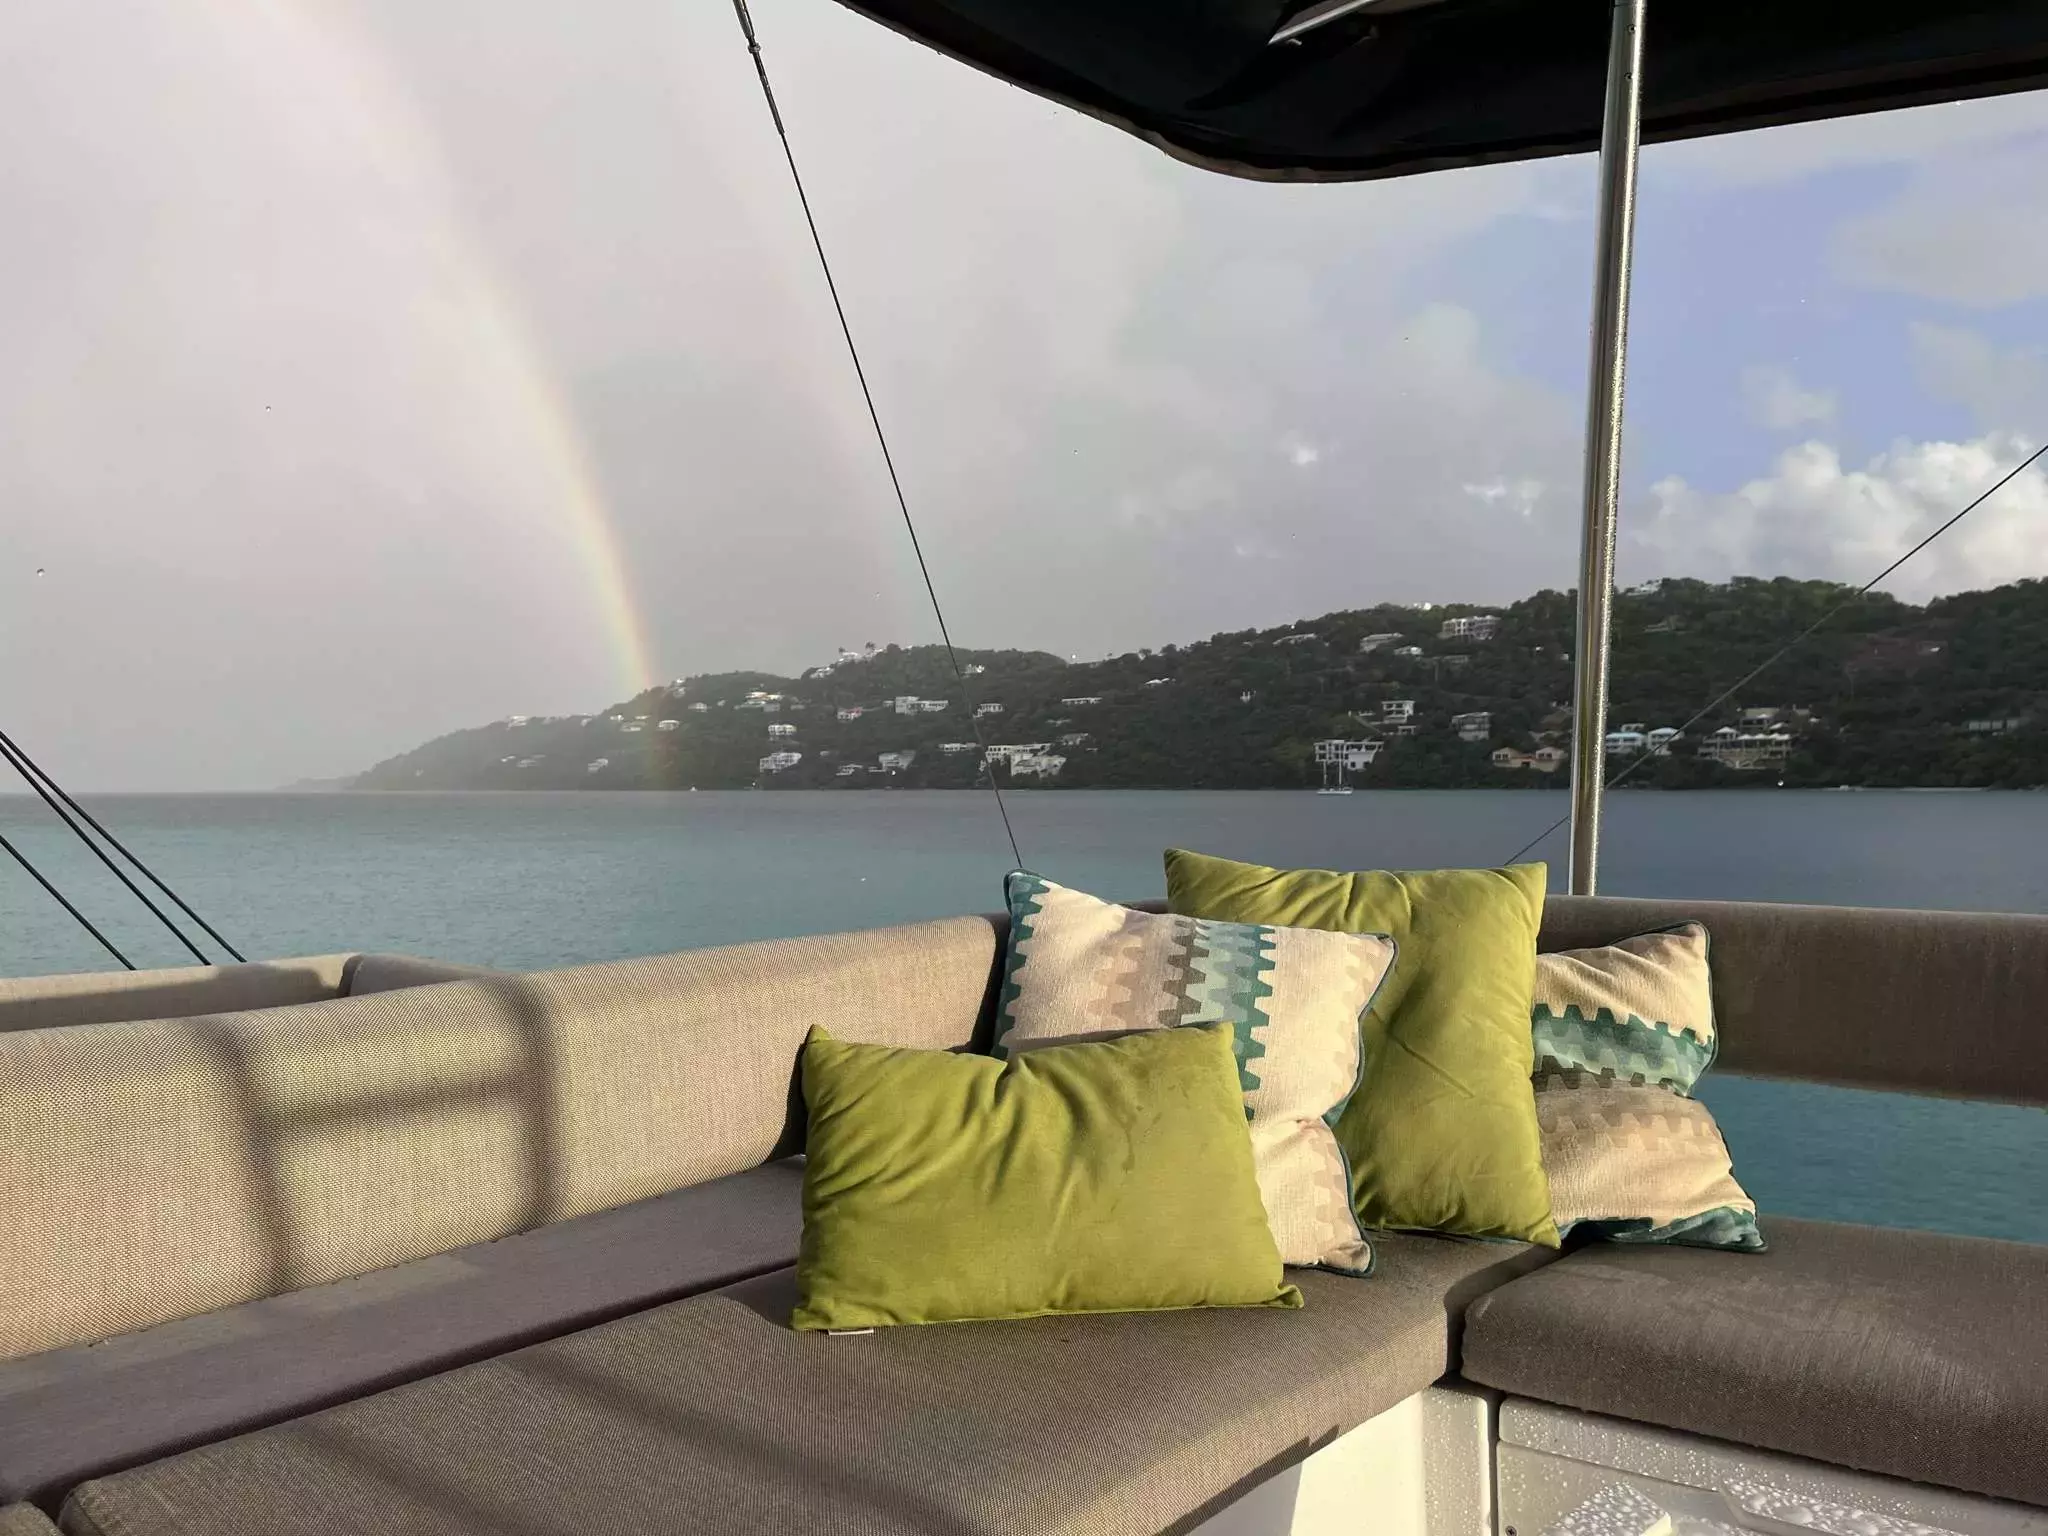 Ithaka by Bali Catamarans - Top rates for a Charter of a private Sailing Catamaran in Puerto Rico